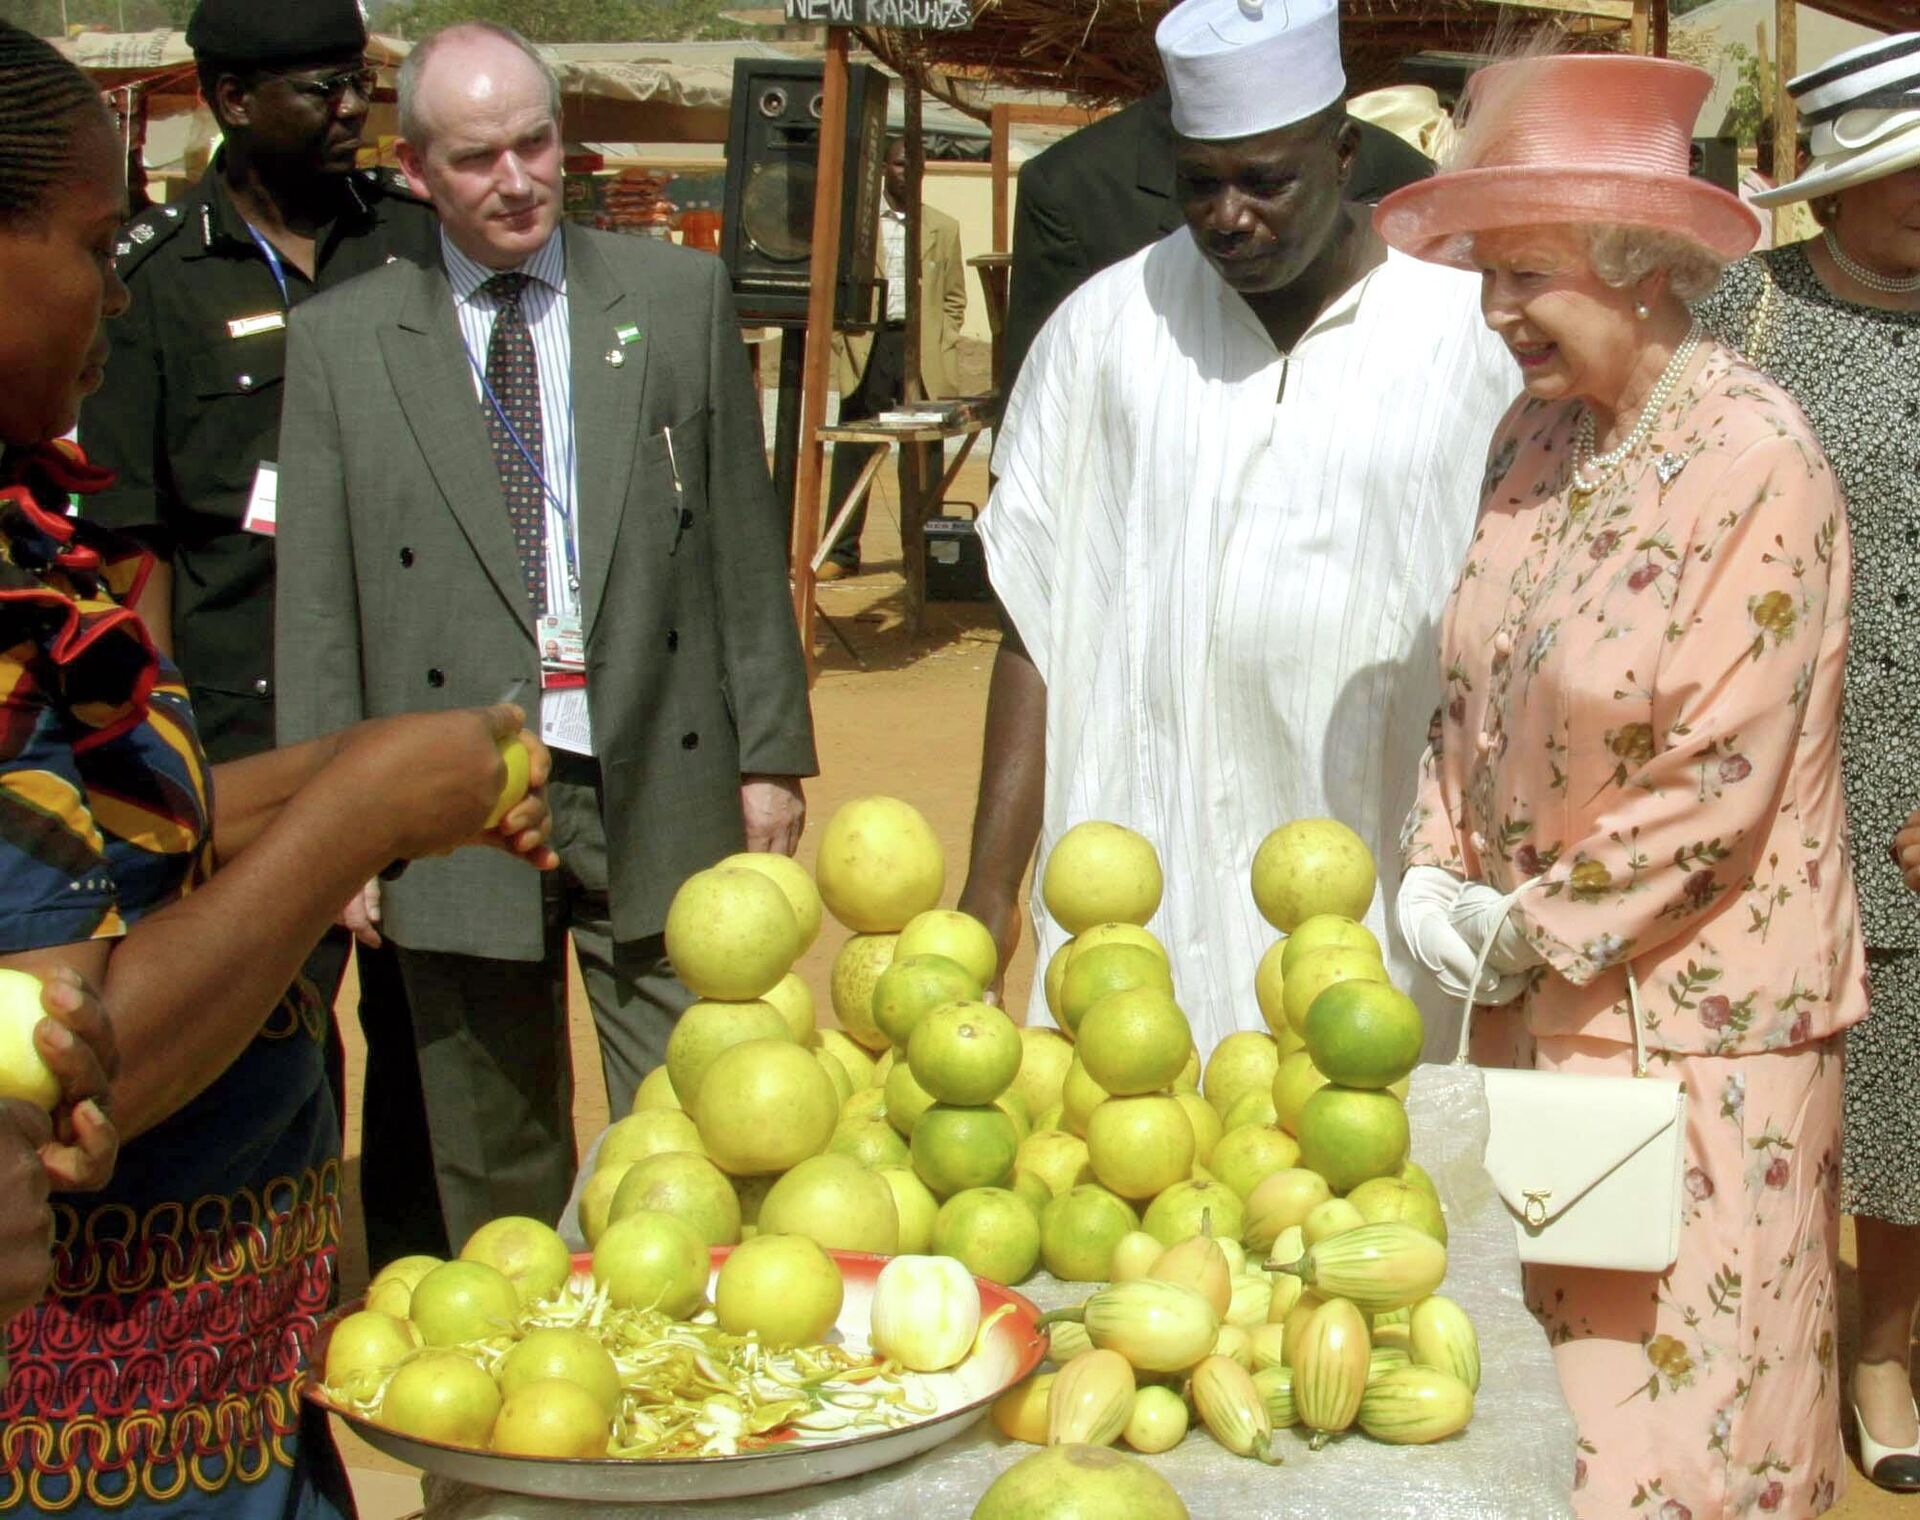 Britain's Queen Elizabeth II, right, tours a  mock-up market in the village of Karu in Nigeria, Thursday Dec. 4, 2003, on the second day of her official visit to the West African country during a meeting of British Commonwealth leaders. The market, staffed by a mixture of actual market-sellers and actors, was purpose-built for the event as part of a BBC radio soap-opera. (AP Photo/Ian Jones, POOL) - Sputnik International, 1920, 09.09.2022